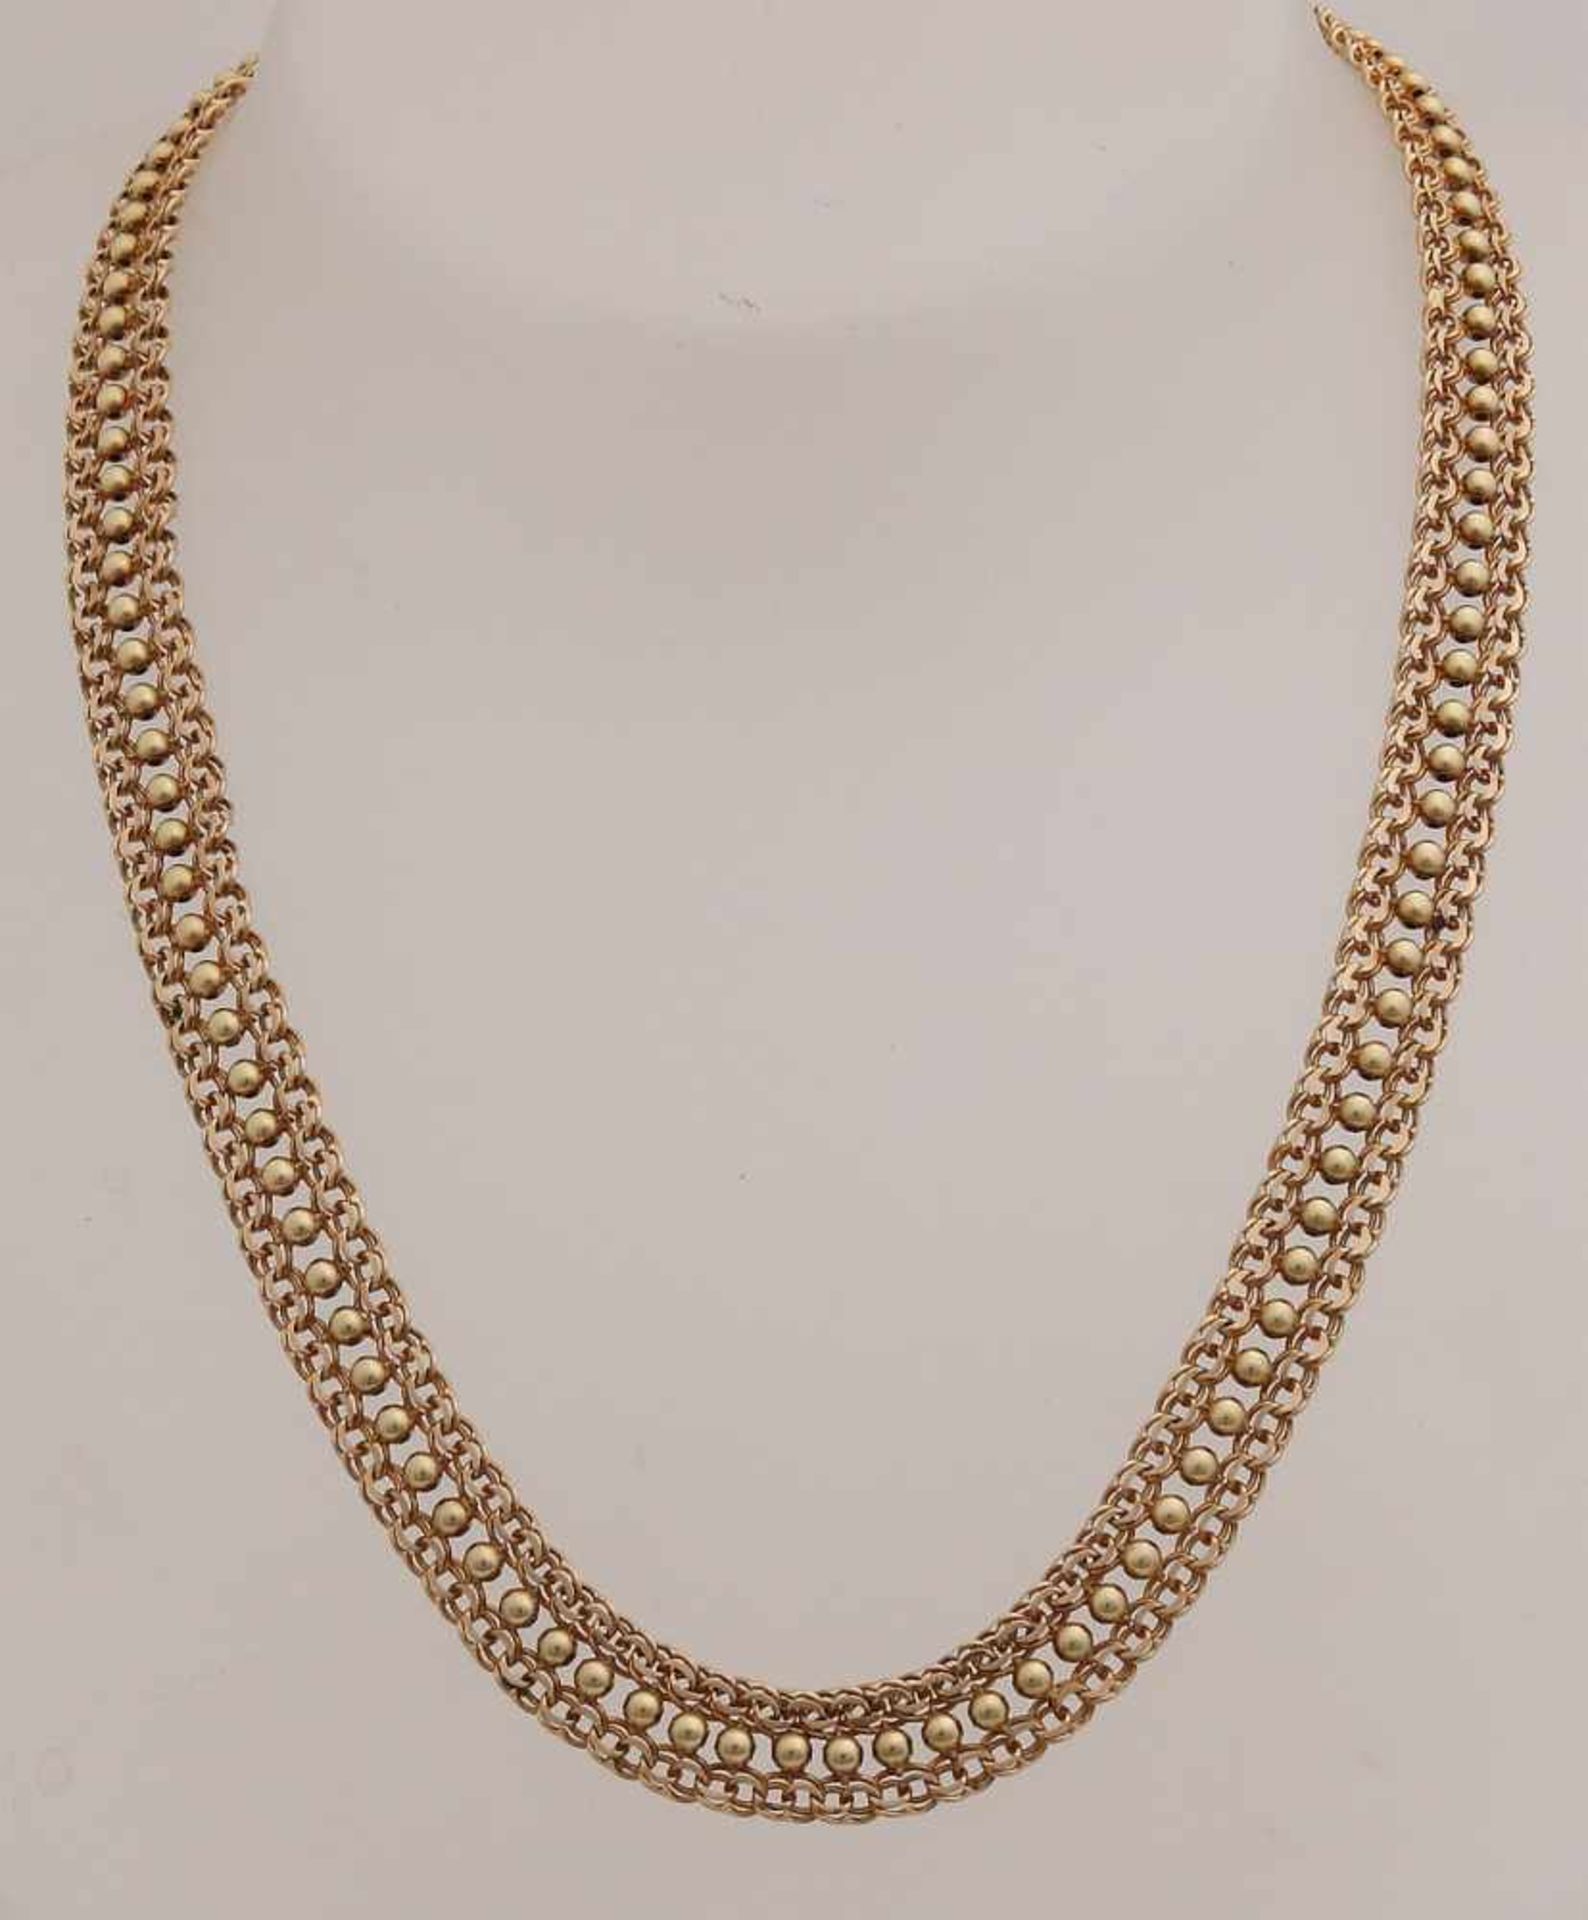 Gold necklace, 585/000, with a Biesmark link in the middle with a row of spheres. width 9 mm, length